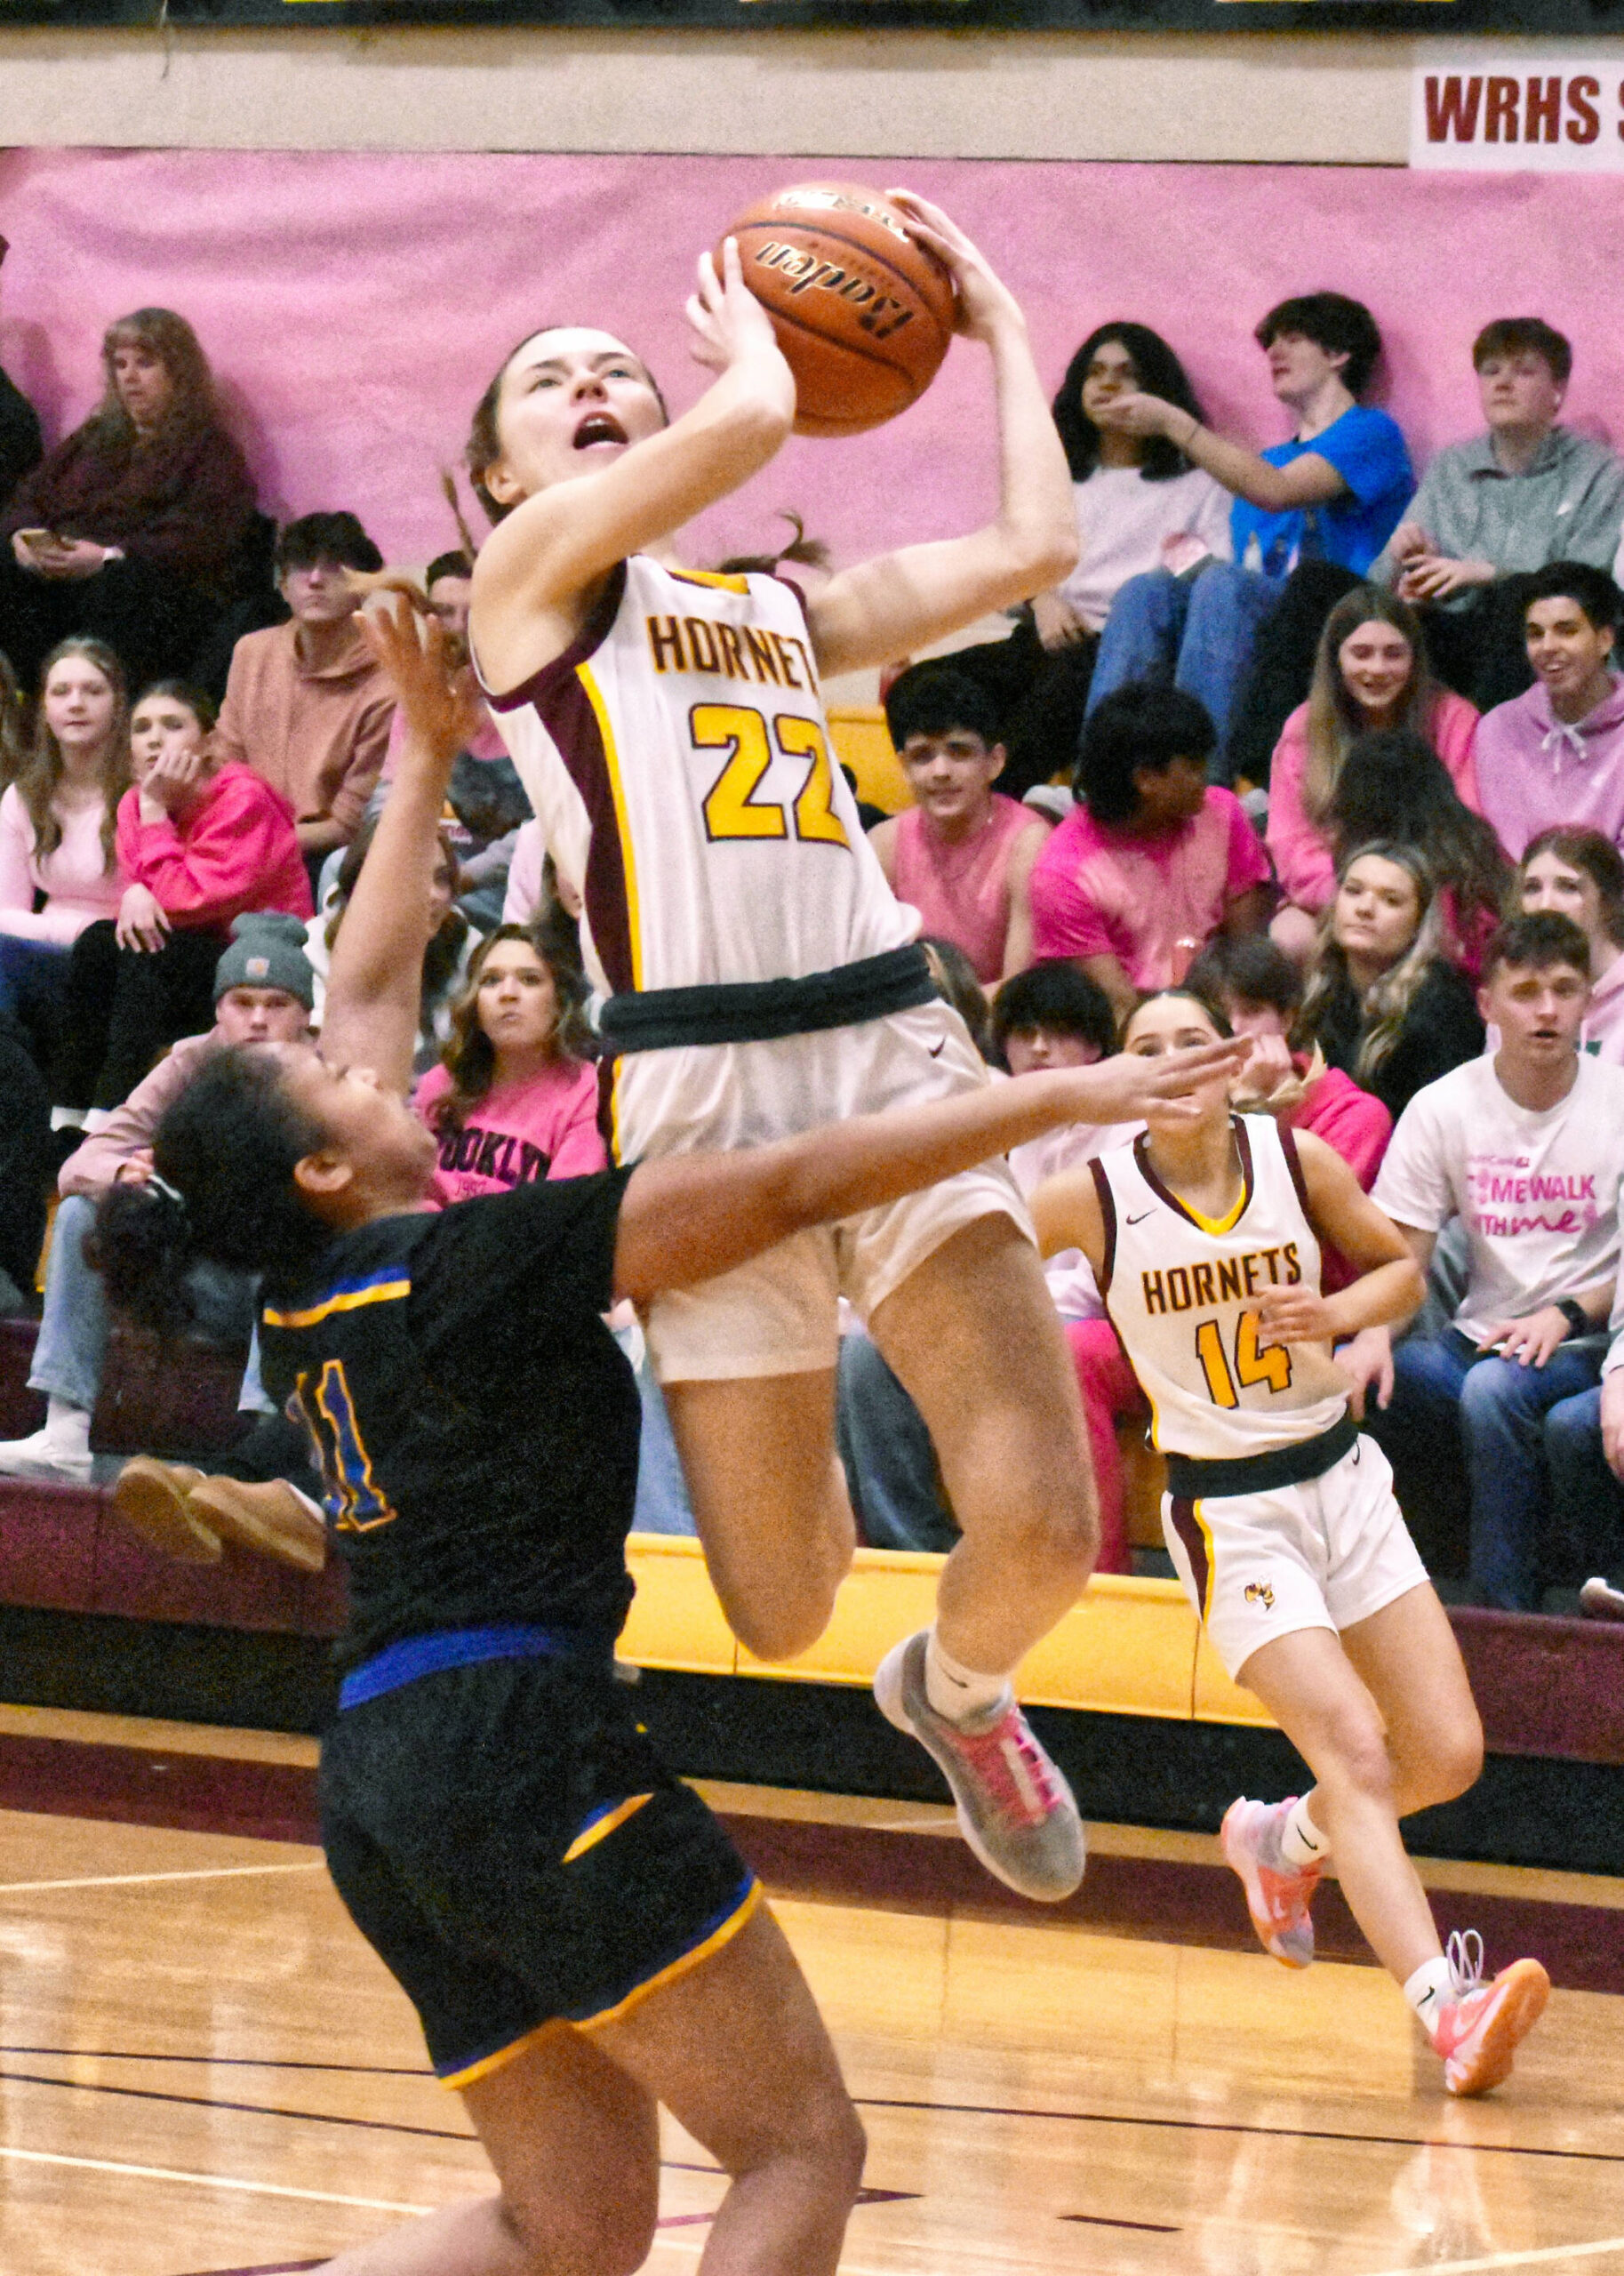 Friday night proved successful for the White River High basketball programs as both the Hornet boys' and girls' teams swept the visiting Fife Trojans. In these photos, White River's Sawyer Bloom (12) looks to score an inside bucket and, on the girls' side, Maggee Schmitz (22) elevates on a drive to the hoop. Photos by Kevin Hanson